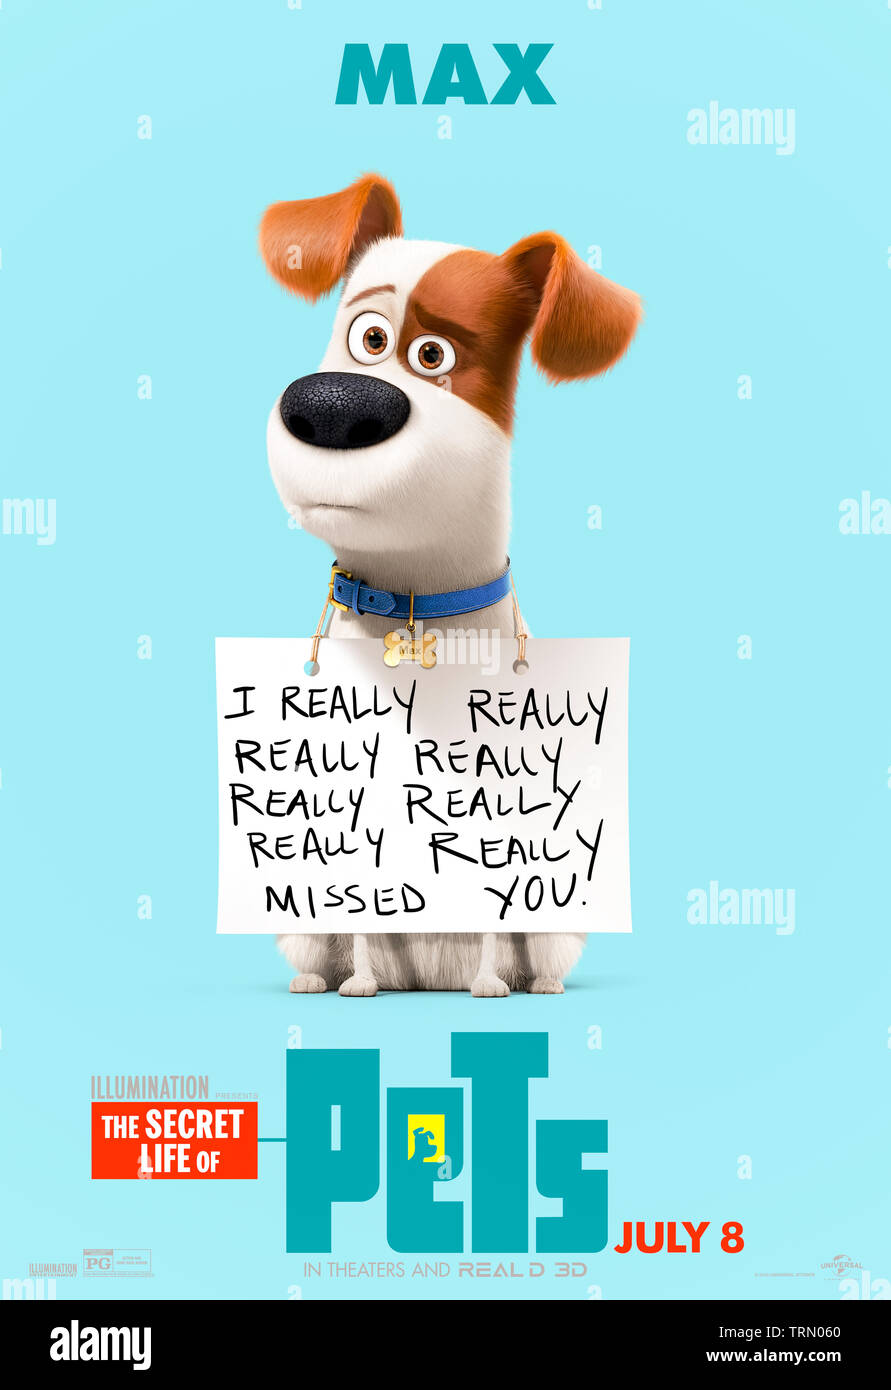 The Secret Life of Pets 2 (2019) directed by Chris Renaud and Max voiced by Louis C.K.. Animated sequel about what pets get up to whilst their owners are out for the day. Stock Photo